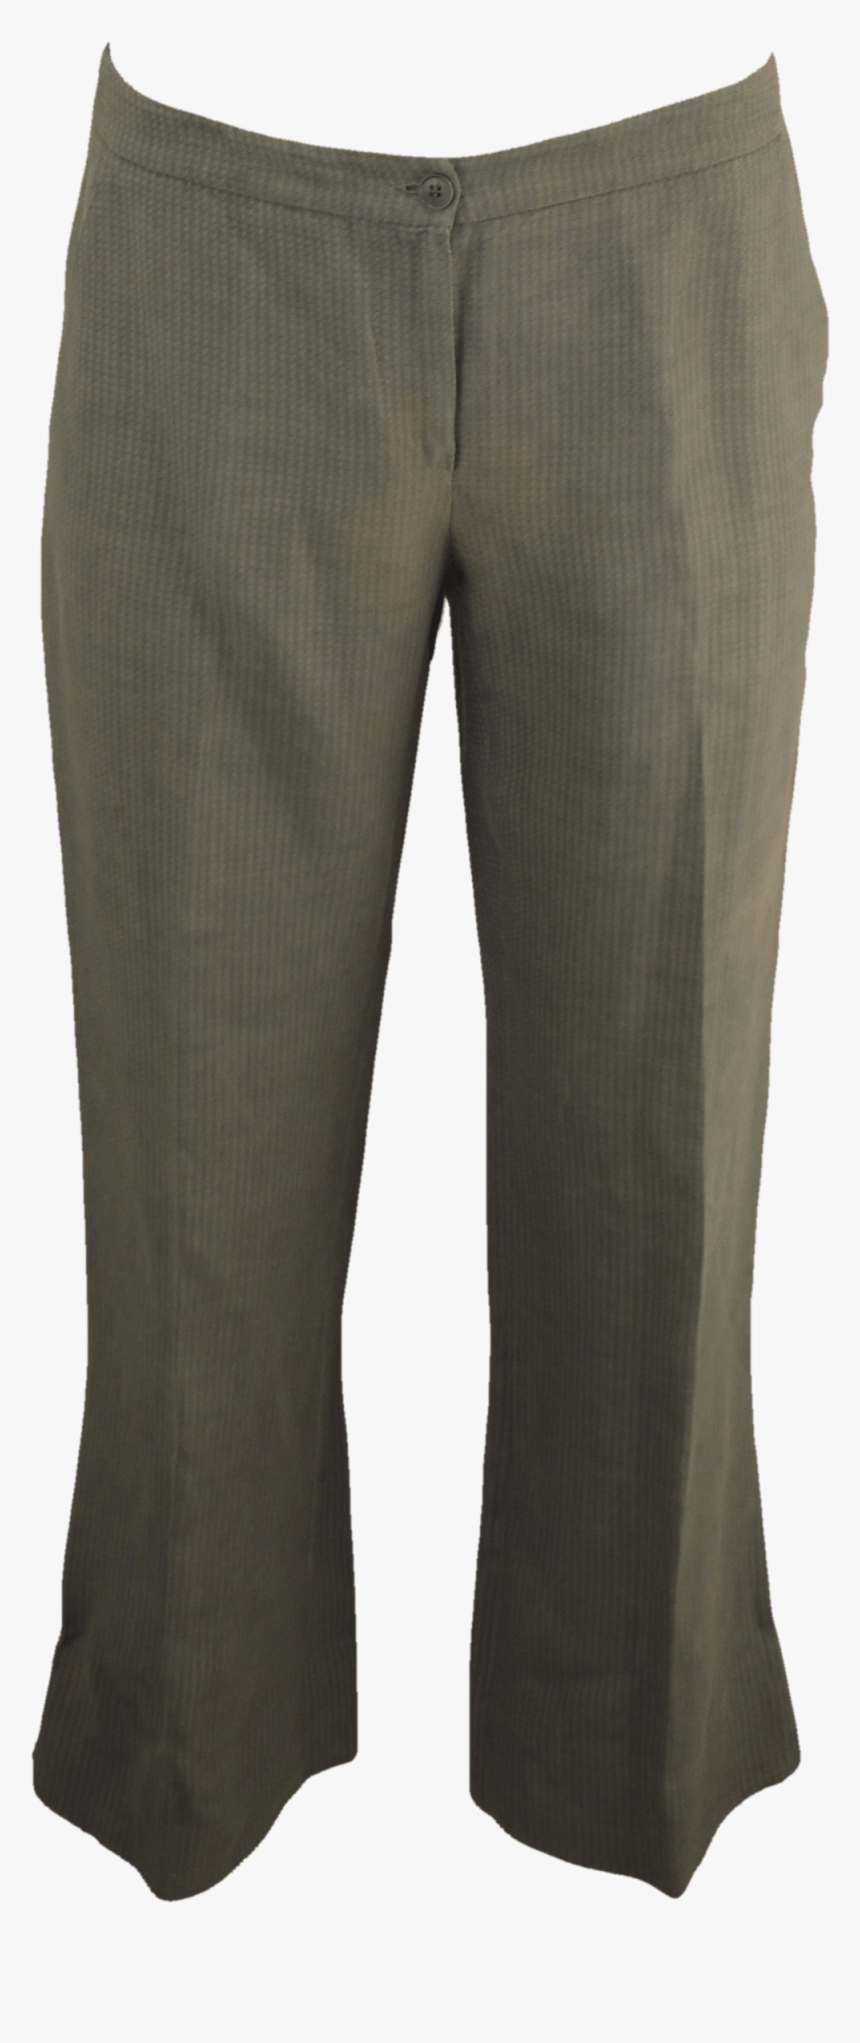 Gray Houndstooth Dress Pants - Pocket, HD Png Download, Free Download